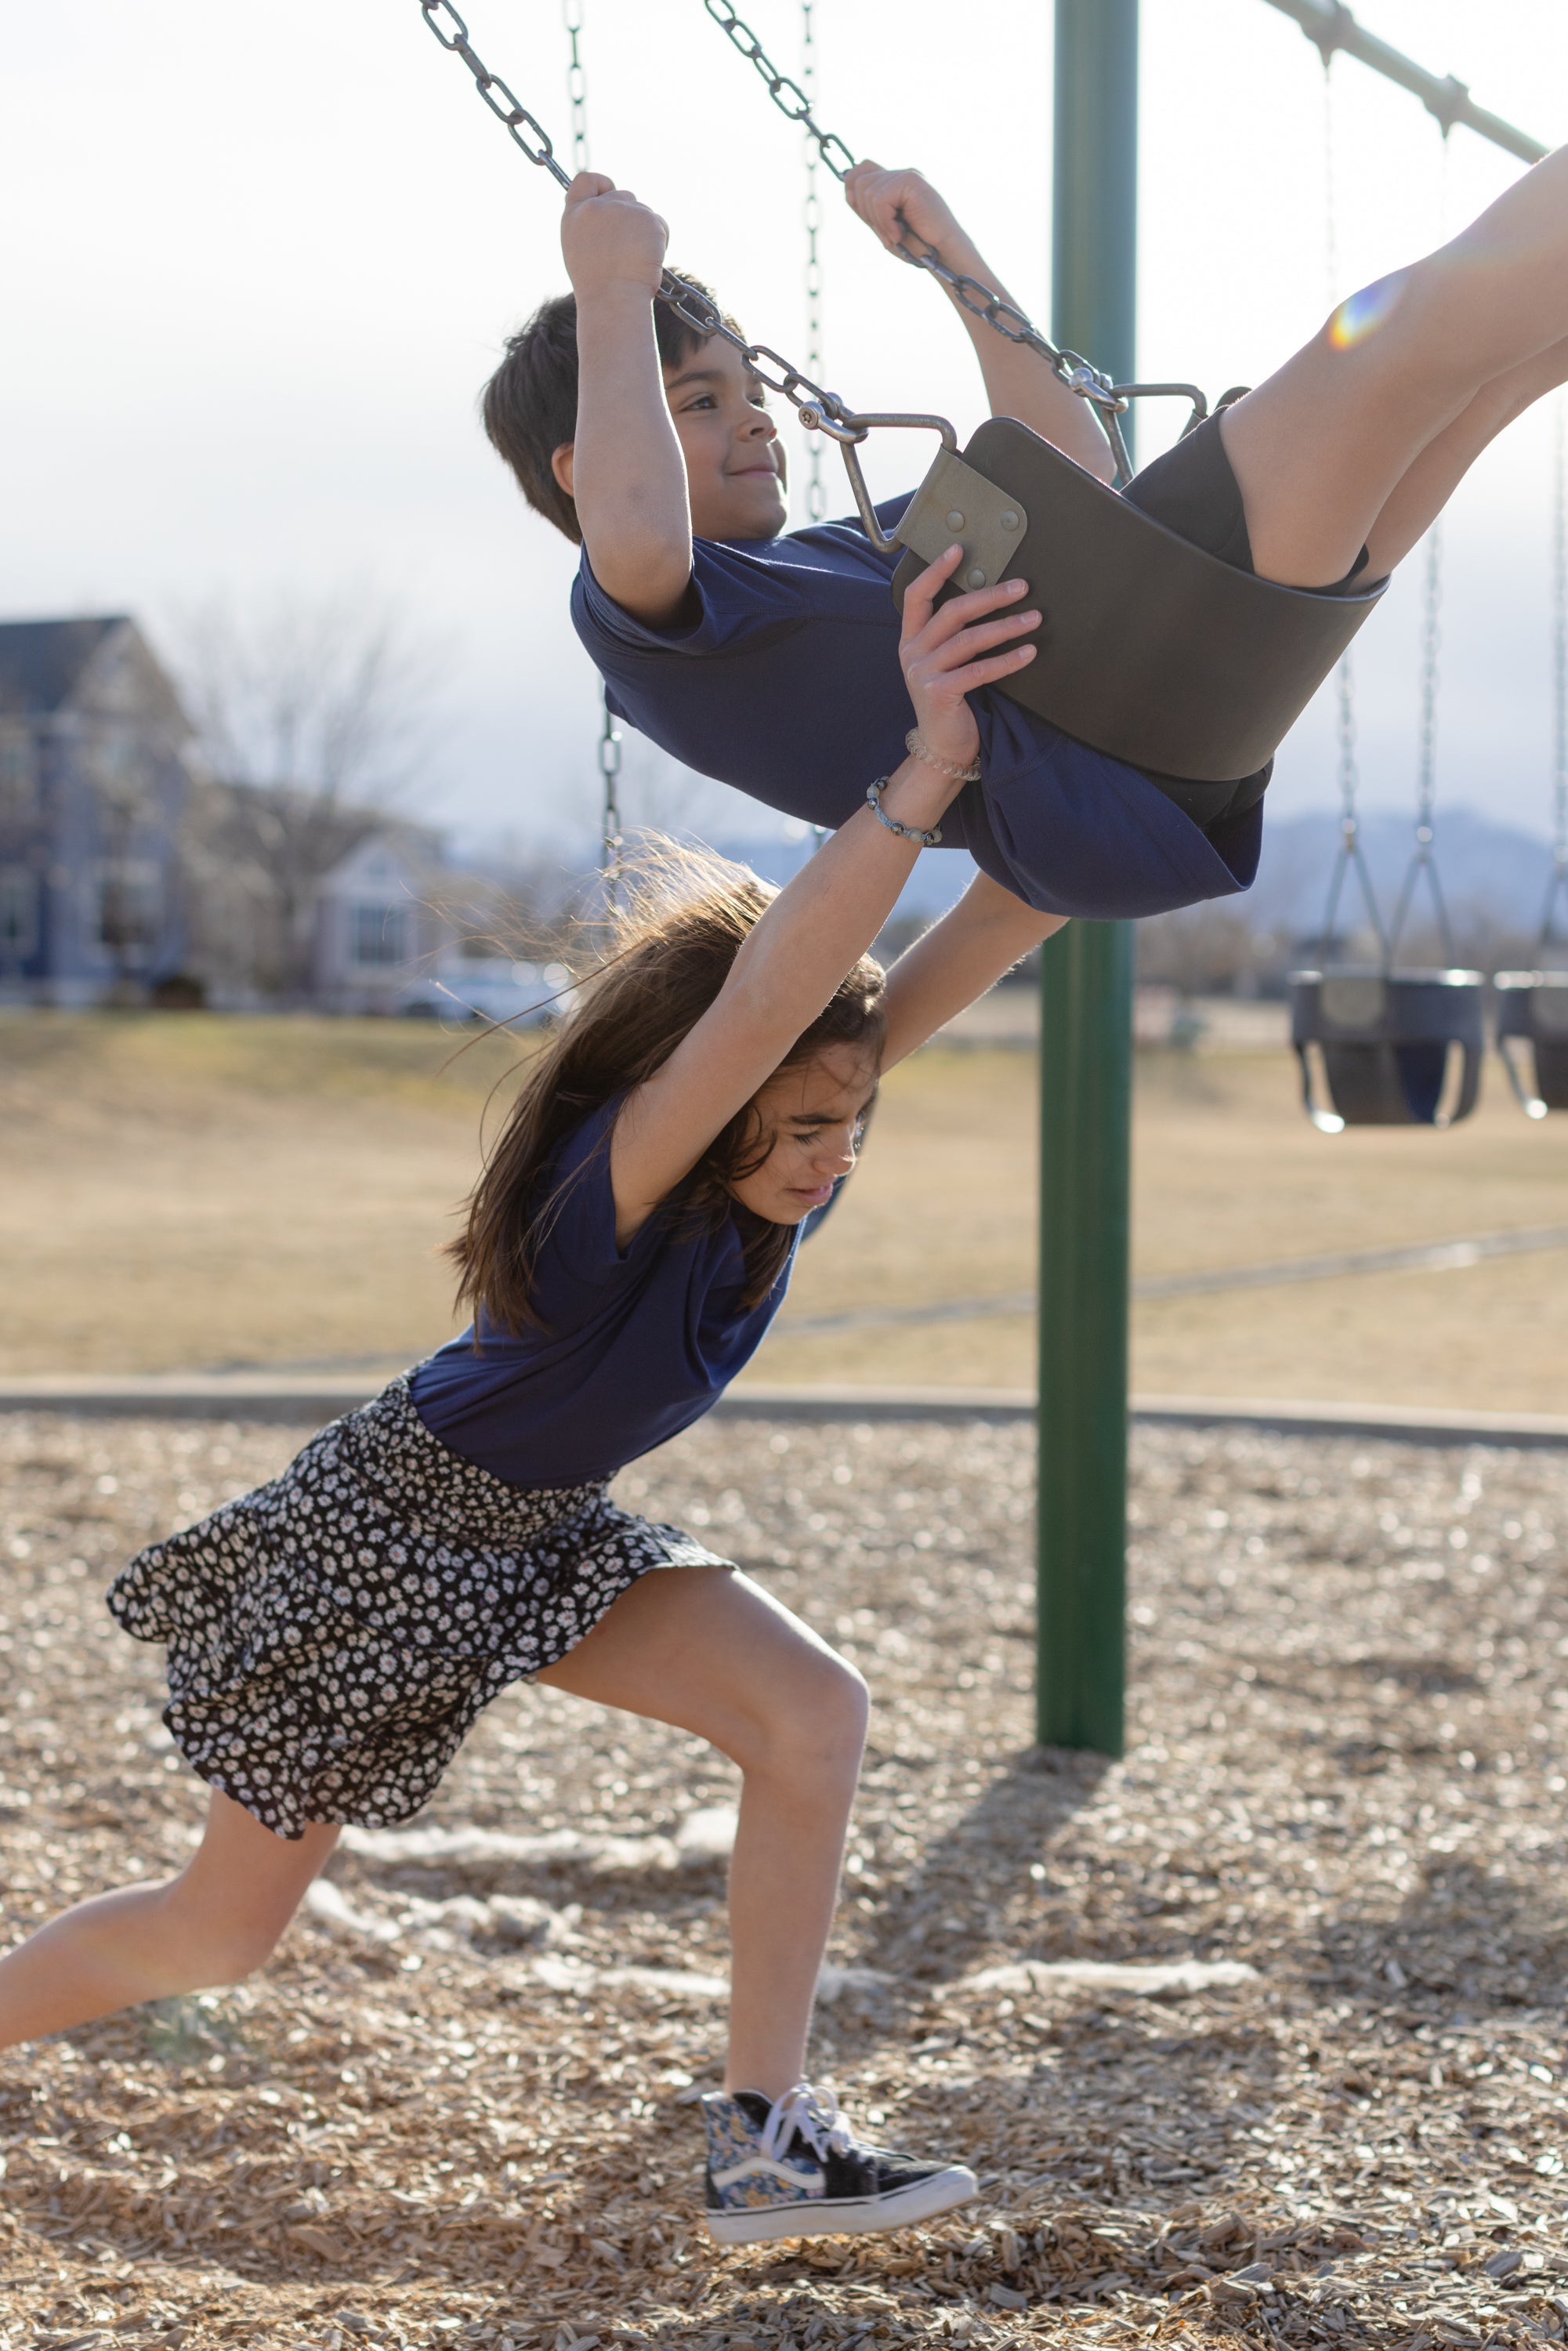 Two kids are playing on the swings together. The little girl is pushing the little boy who is sitting on the black swings. They are both wearing a navy blue basic t-shirt. The little girl is wearing a black and white skirt, and the boy is wearing black shorts.